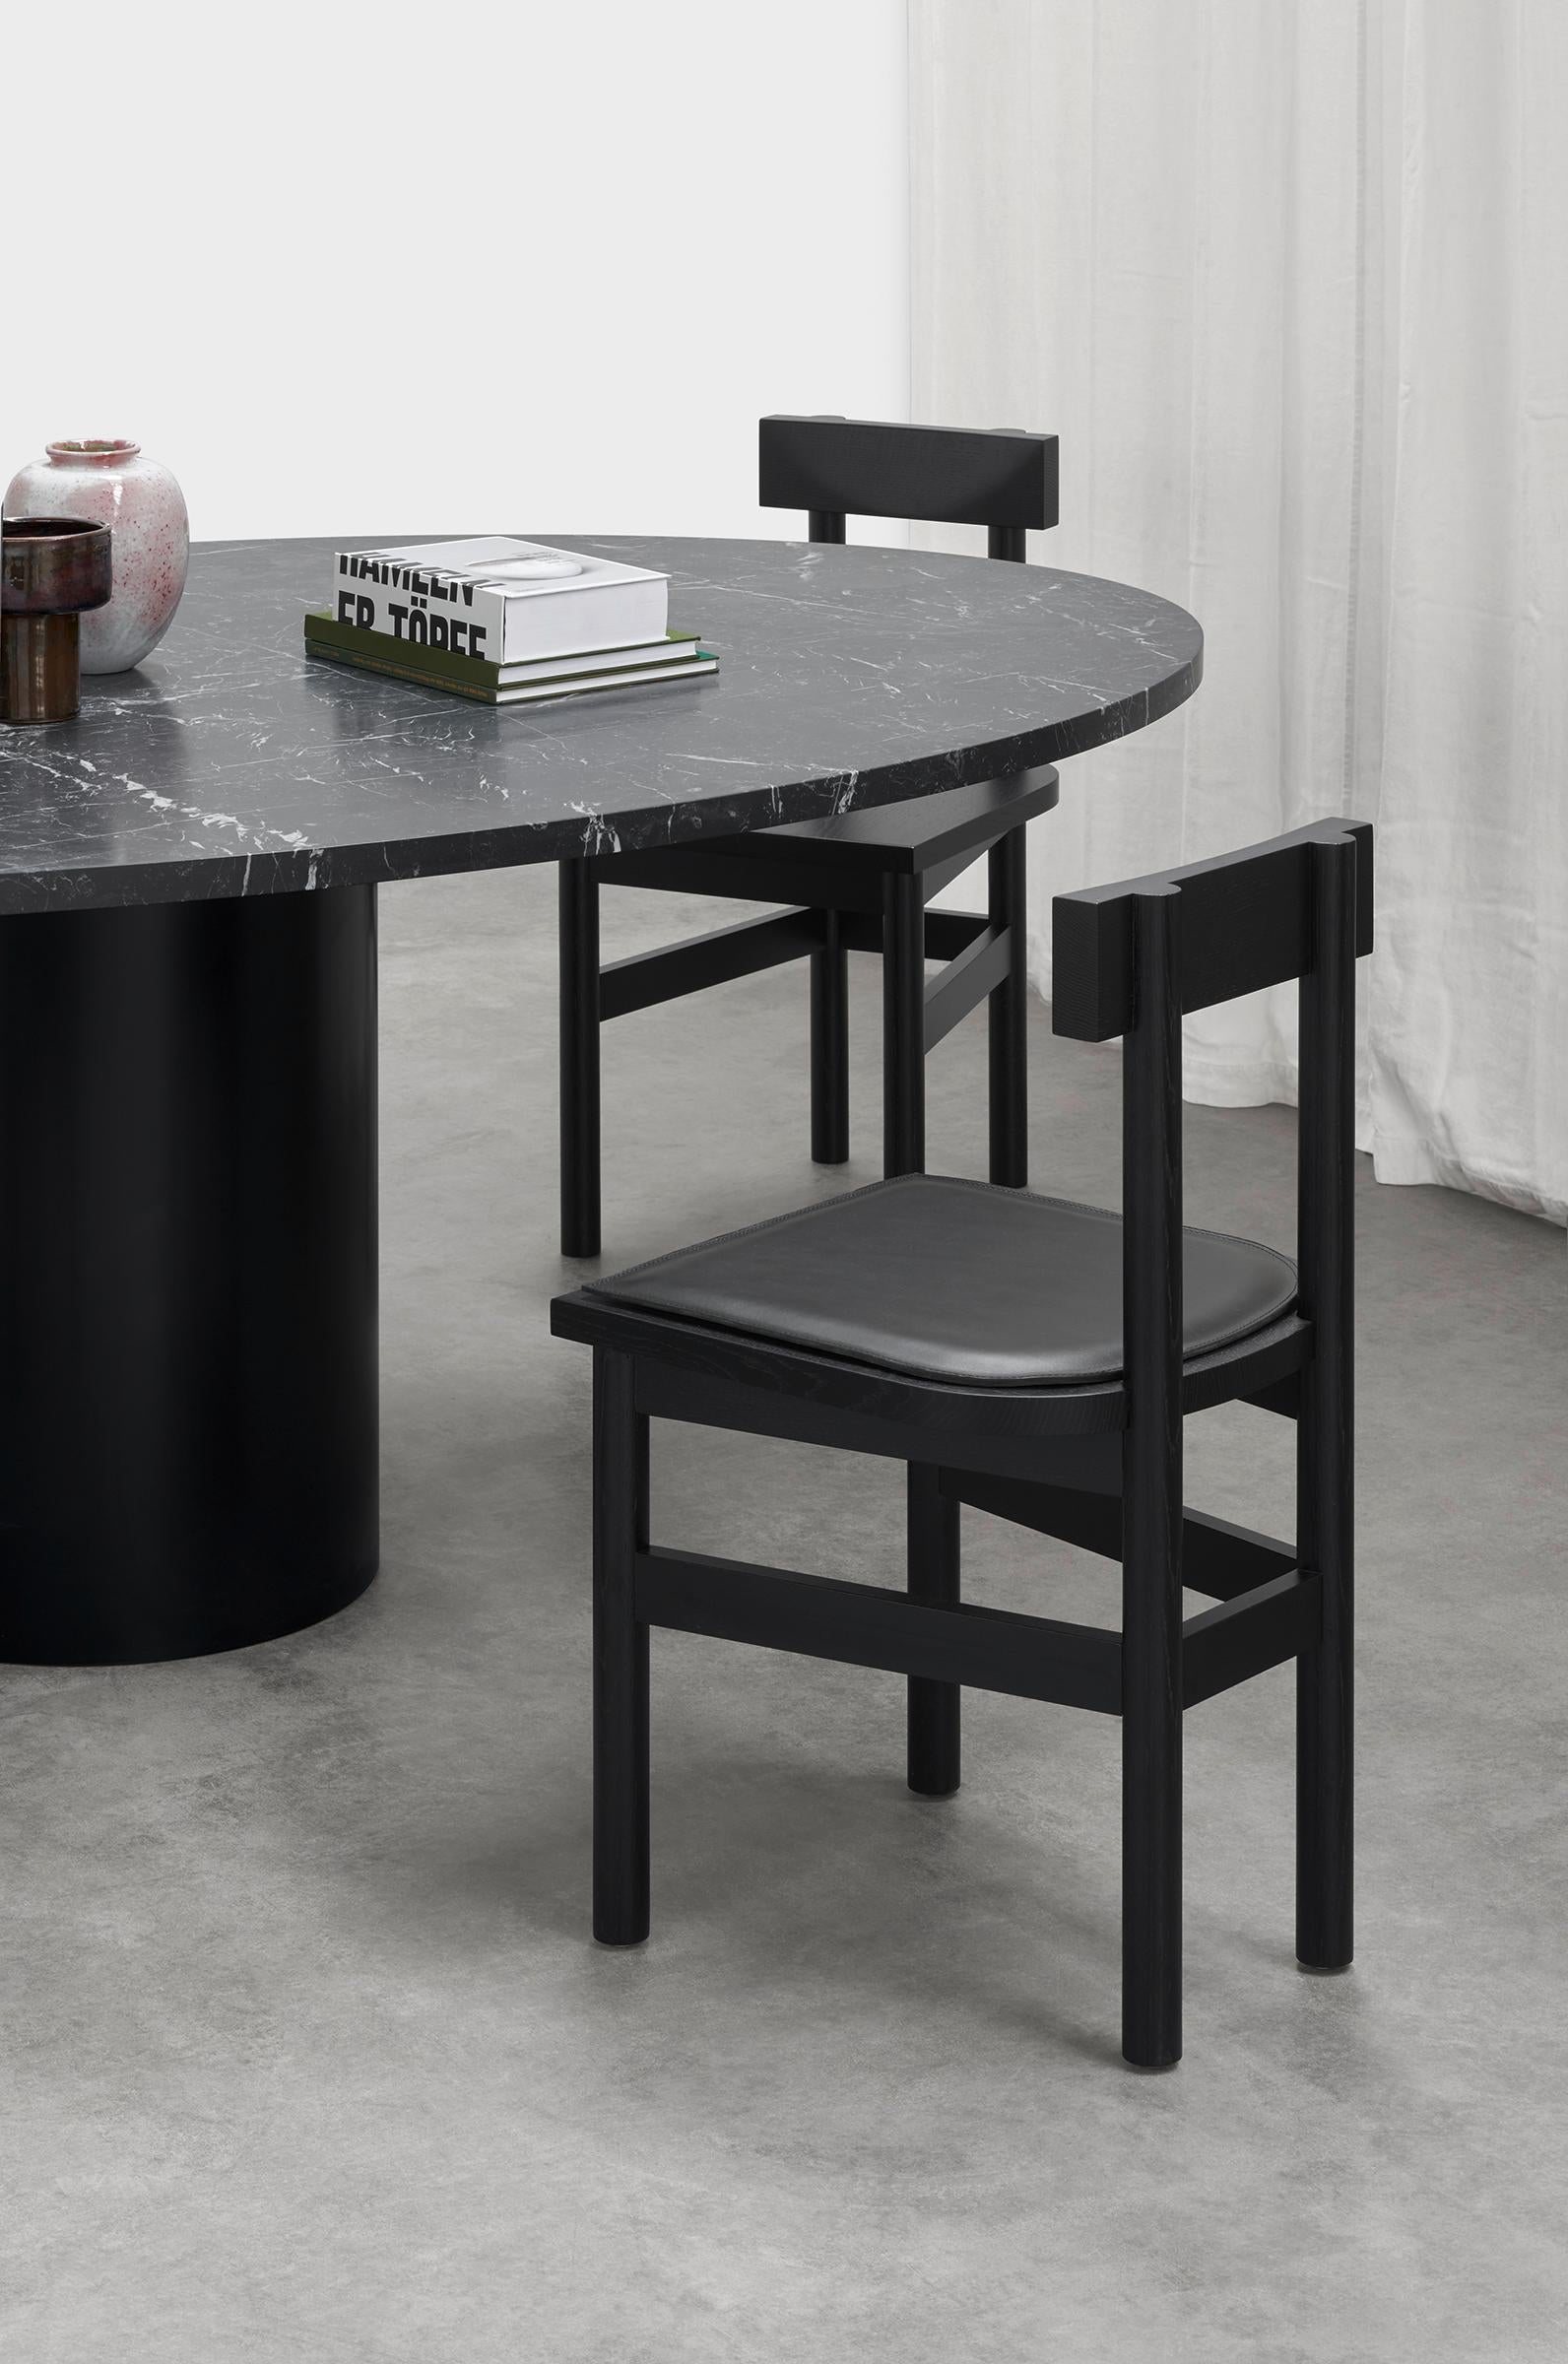 HIROKI is a sculptural dining table made of rich marble in combination with a harmonising or contrasting coloured steel base. In its initial design based on the side table ENOKI, the versatile HIROKI extends the family of tables with an elegant and